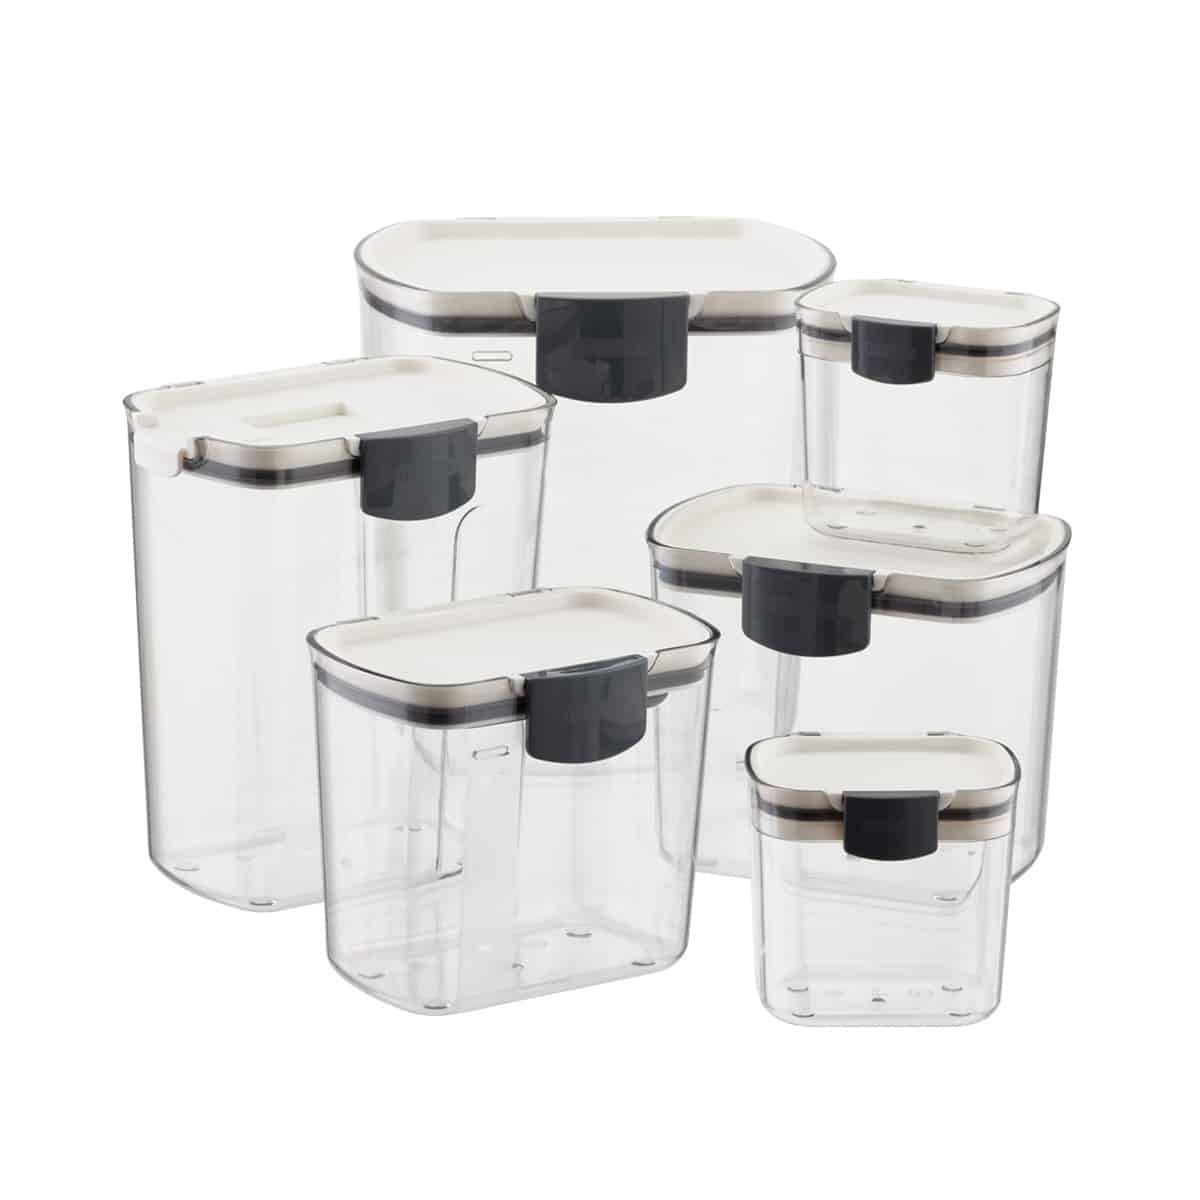 ProKeeper Baker's Storage Set of 6 - Done & Done Home